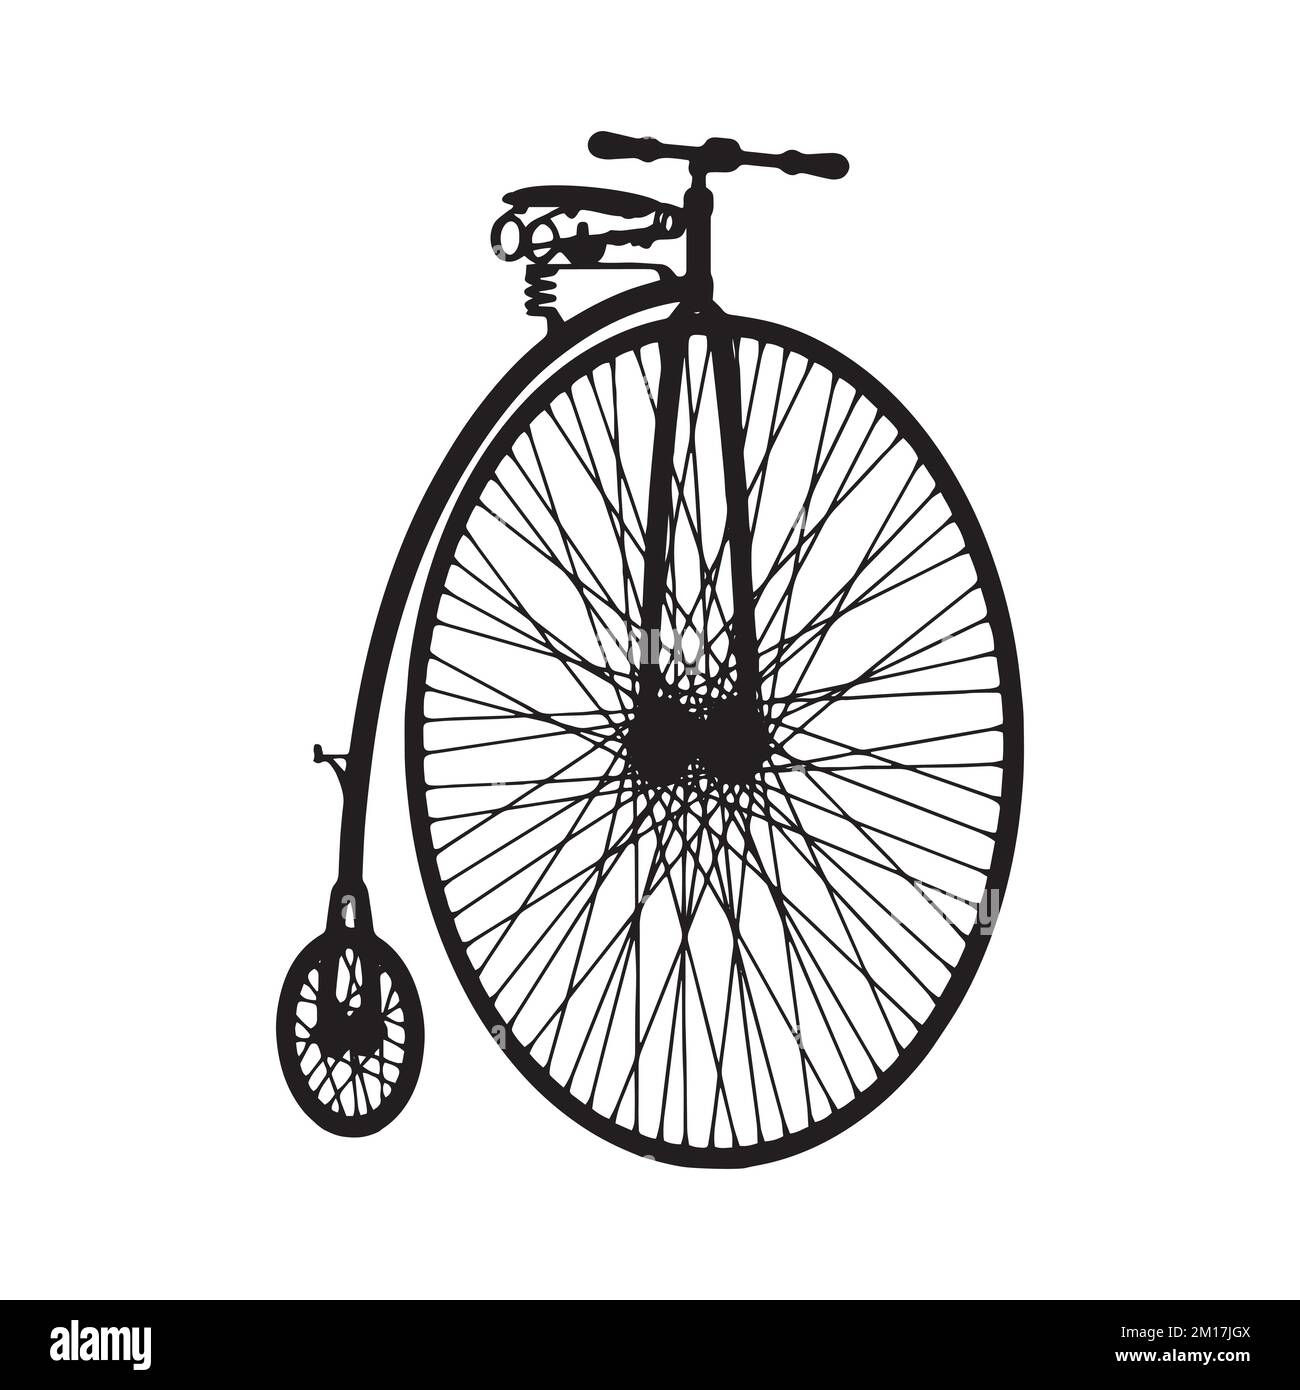 Vector Illustration of Penny Farthing Bicycle Silhouette Stock Vector